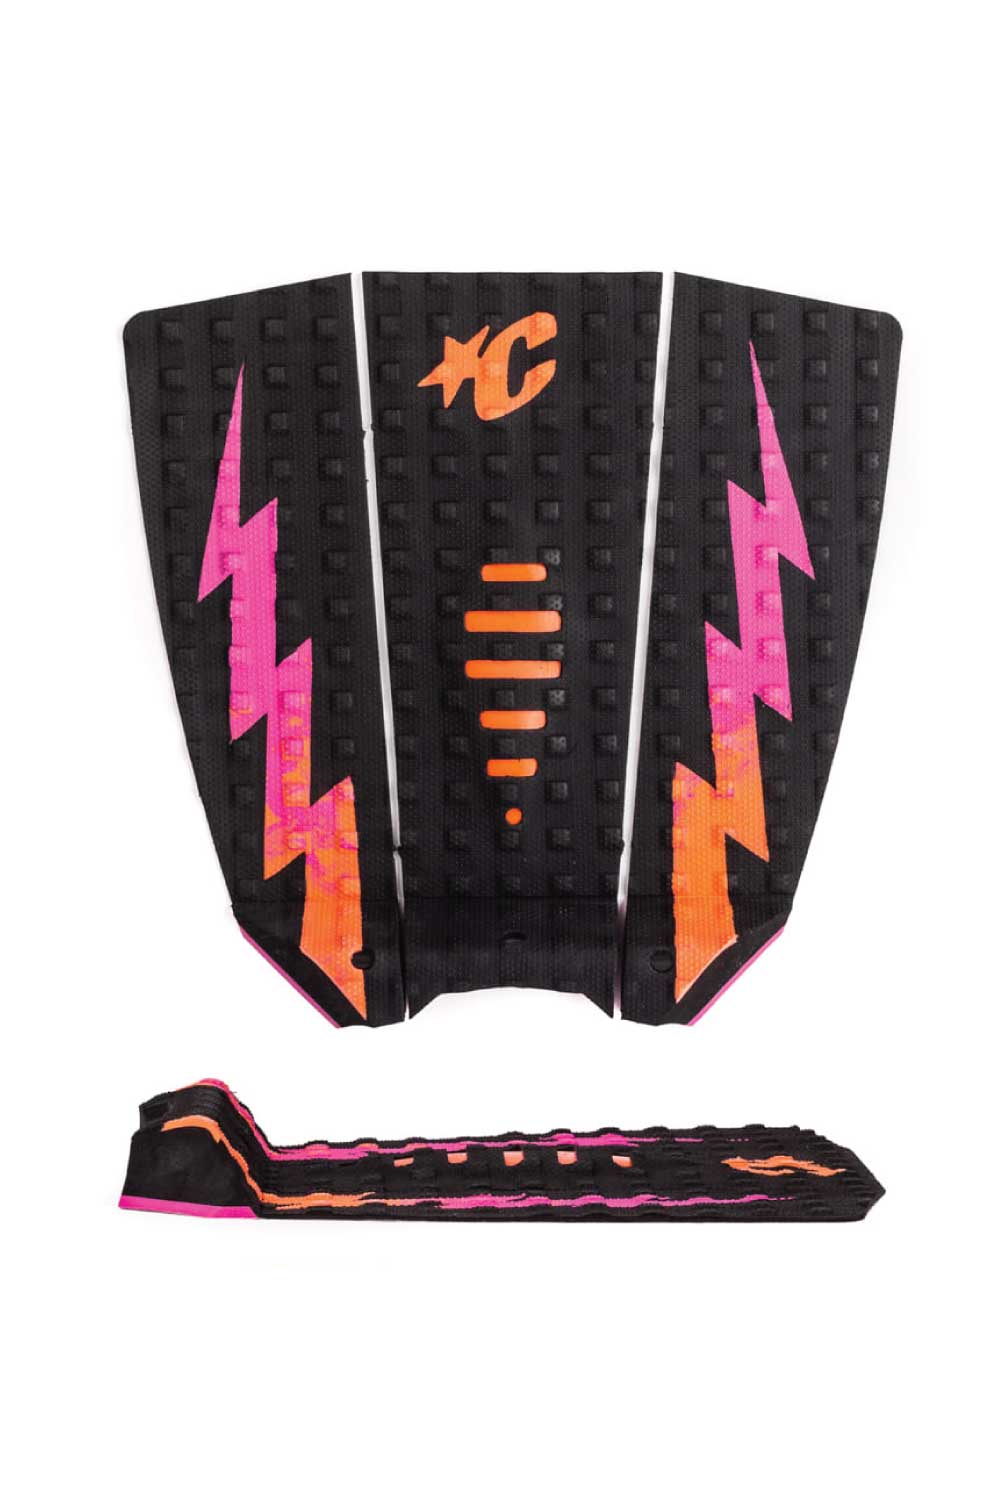 Creatures of Leisure Mick EUGENE Fanning Lite Tail Pad